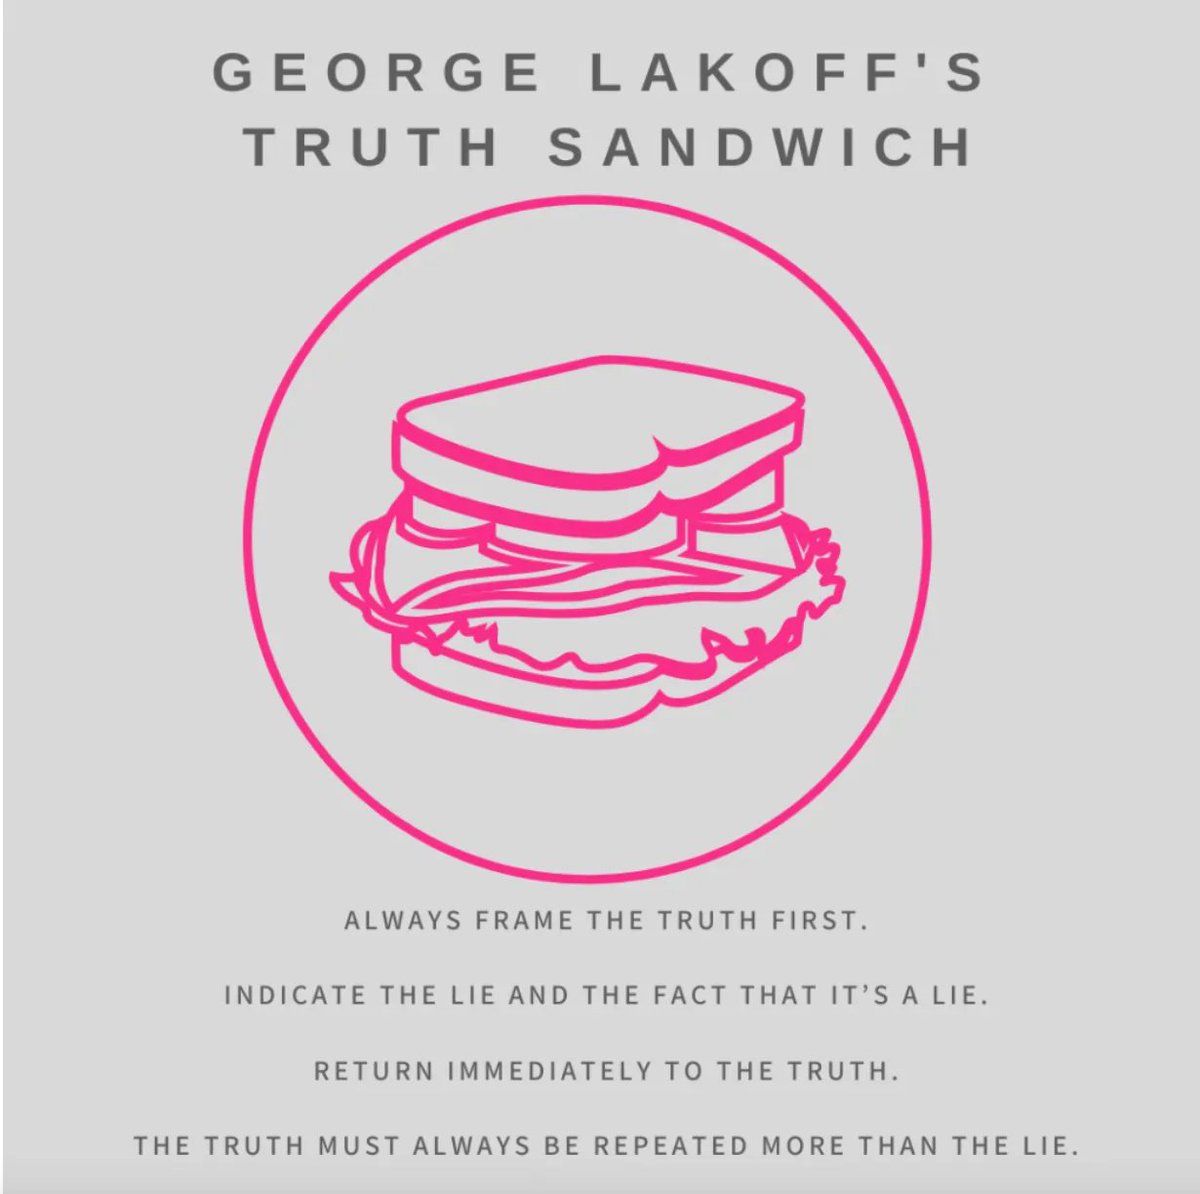 Serving a Truth Sandwich does require the media to take a side. The side of truth. New from me in @gilduran76 and @GeorgeLakoff's @FramelabNews. theframelab.org/p/you-cant-ser…